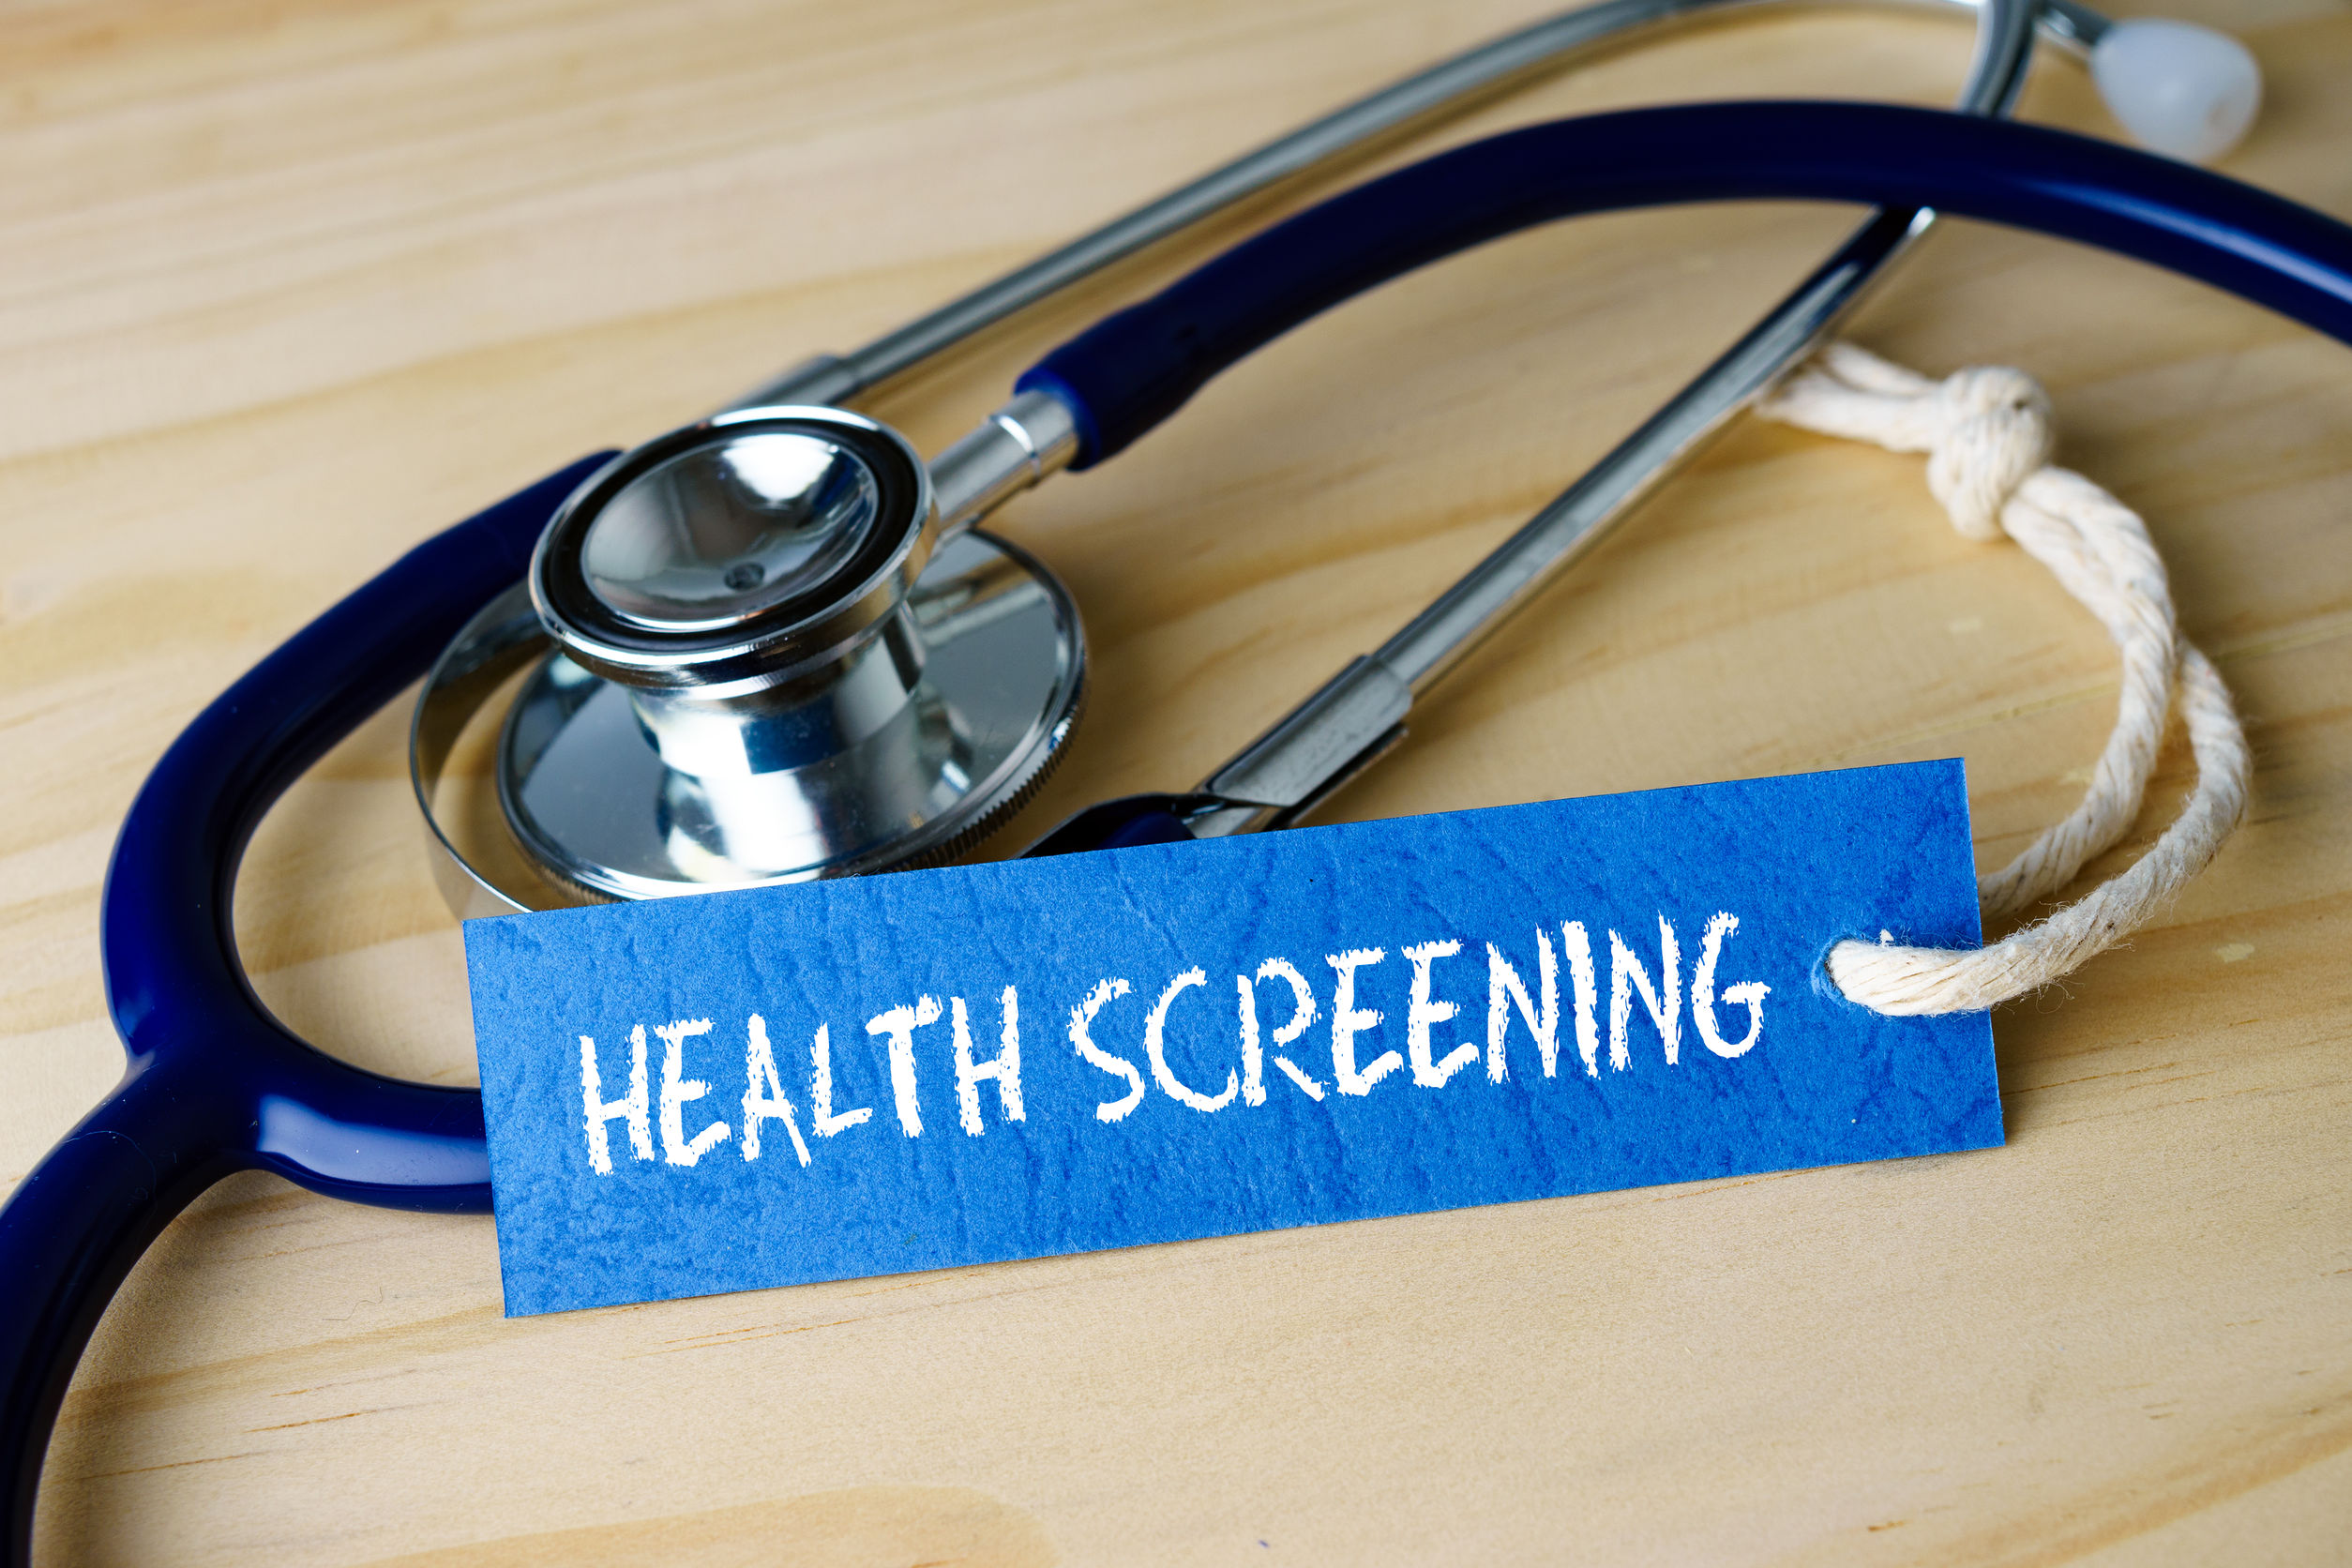 7 Reasons Why Every Middle-Aged Man Should Go Through a Health-Screening Test